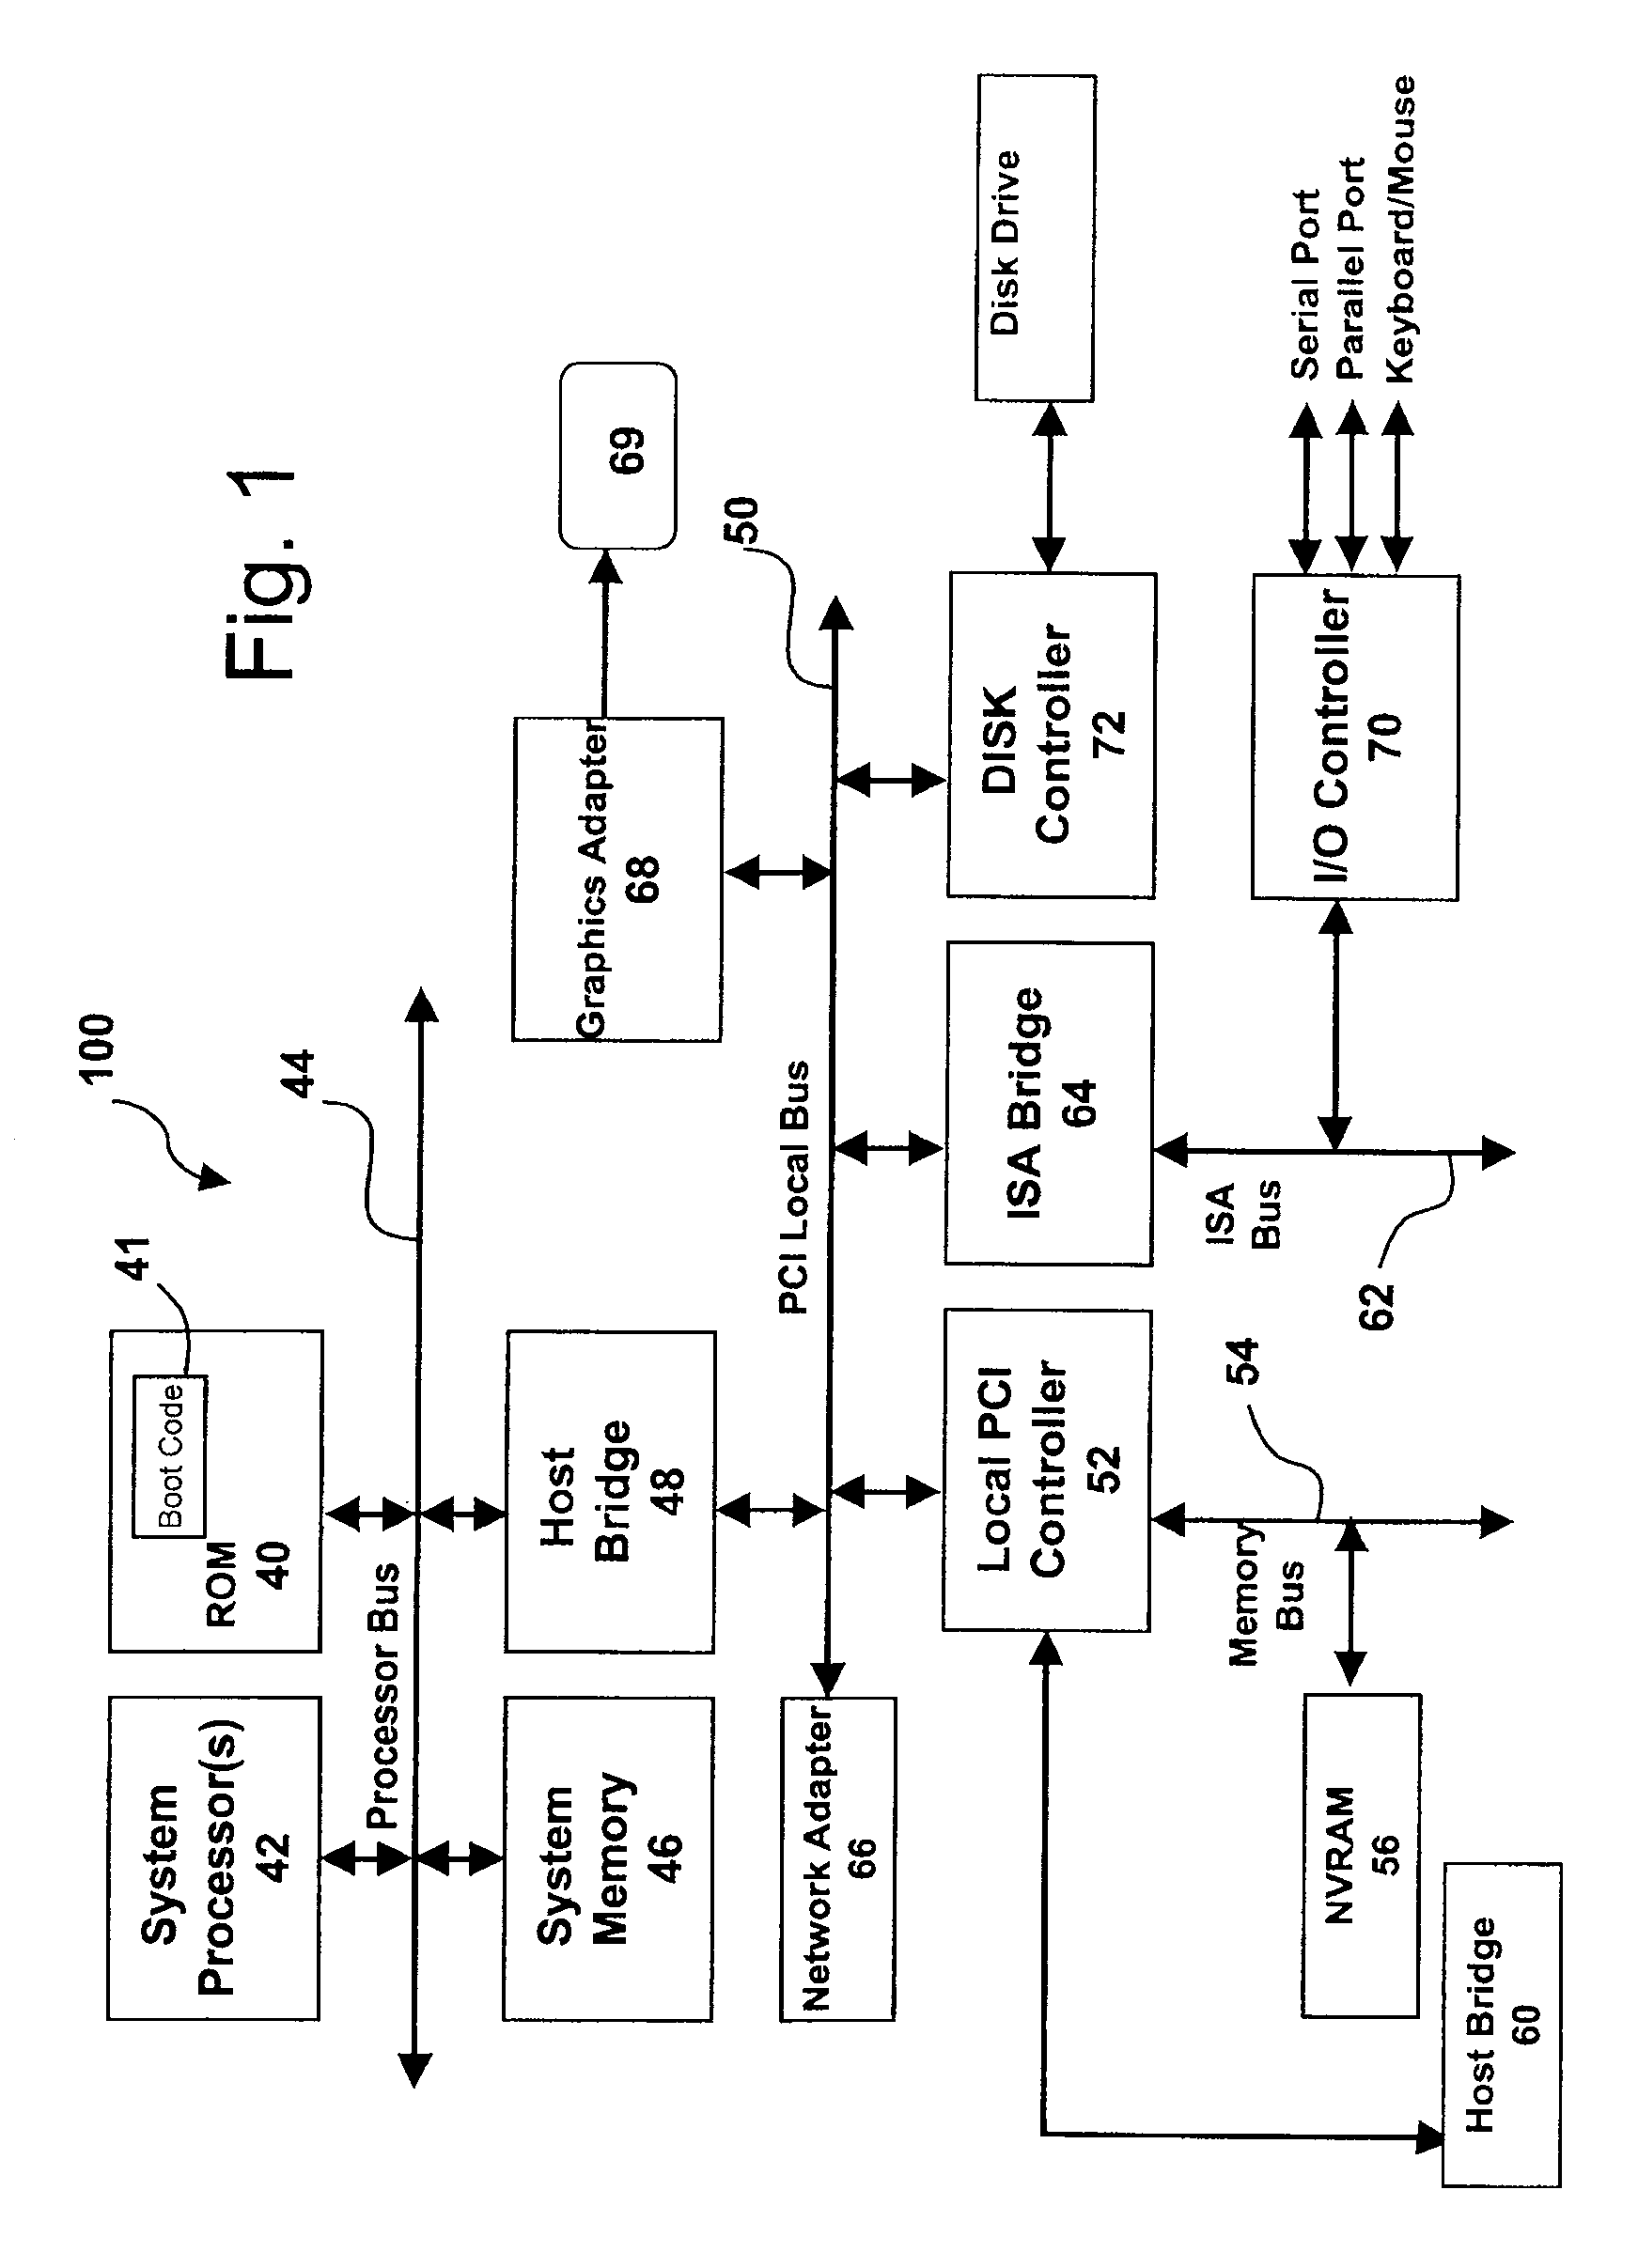 System and method for identifying media and providing additional media content